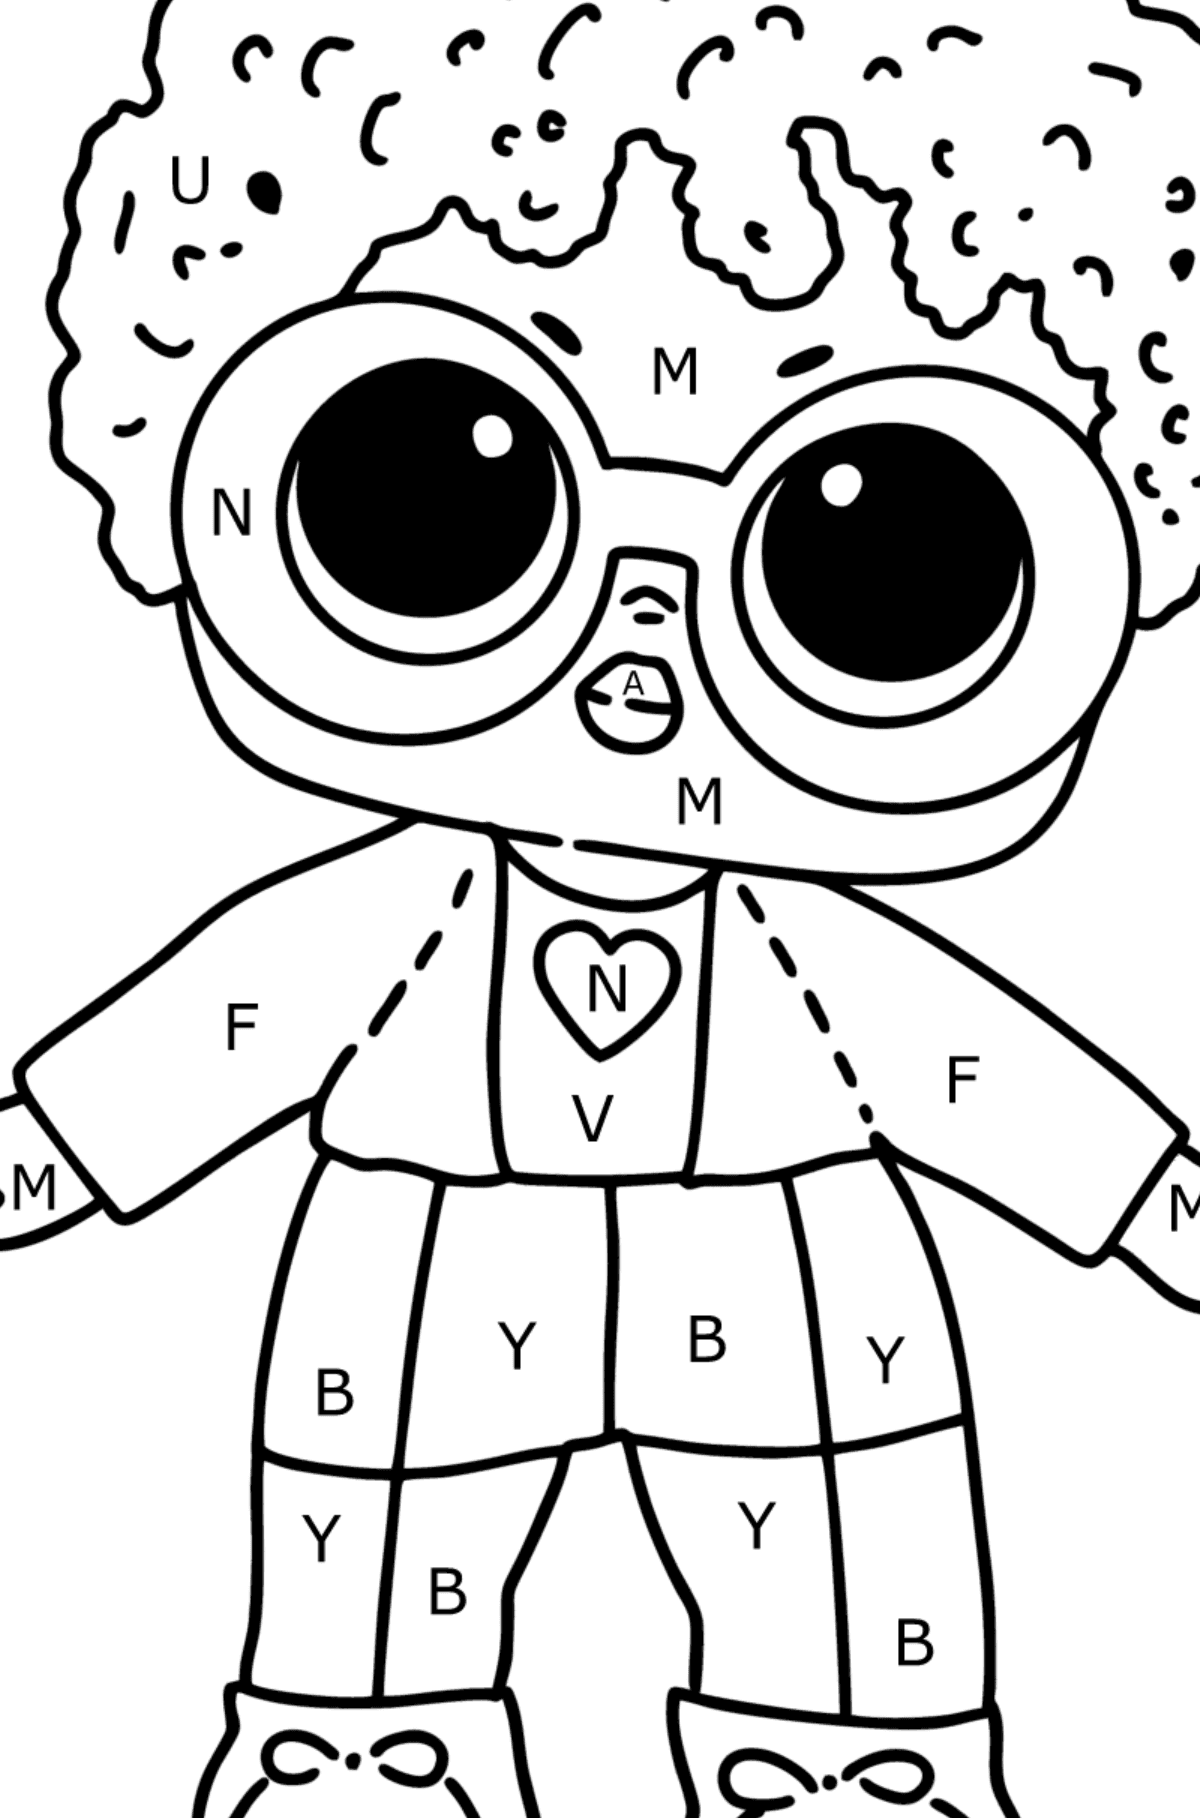 LOL Surprise Steezy Doll Boy coloring page - Coloring by Letters for Kids